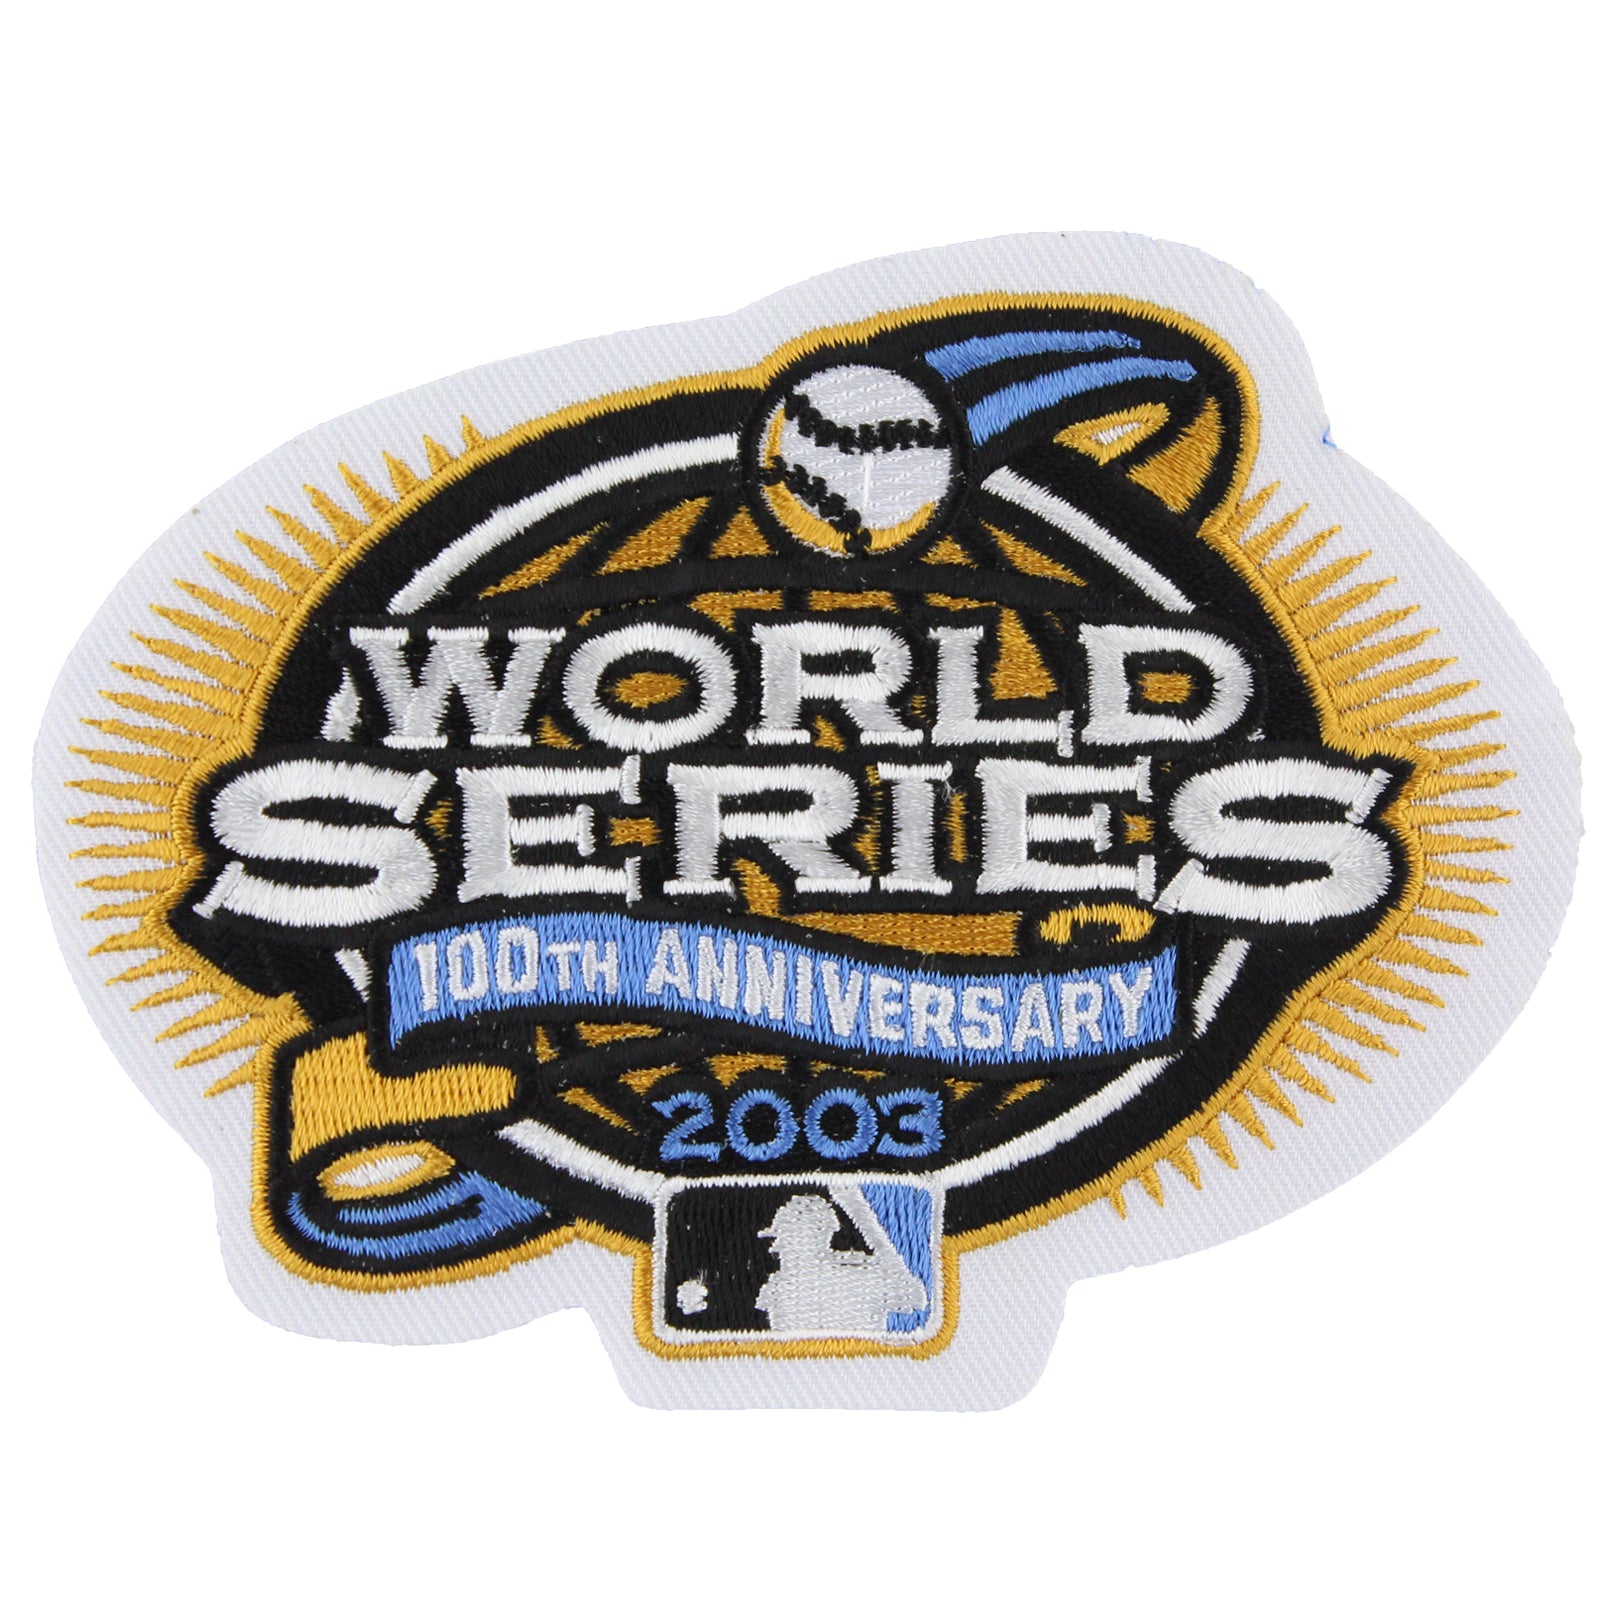 2003 MLB World Series 100th Anniversary Logo Jersey Sleeve Patch (New York Yankees vs. Florida Marlins) by Patch Collection